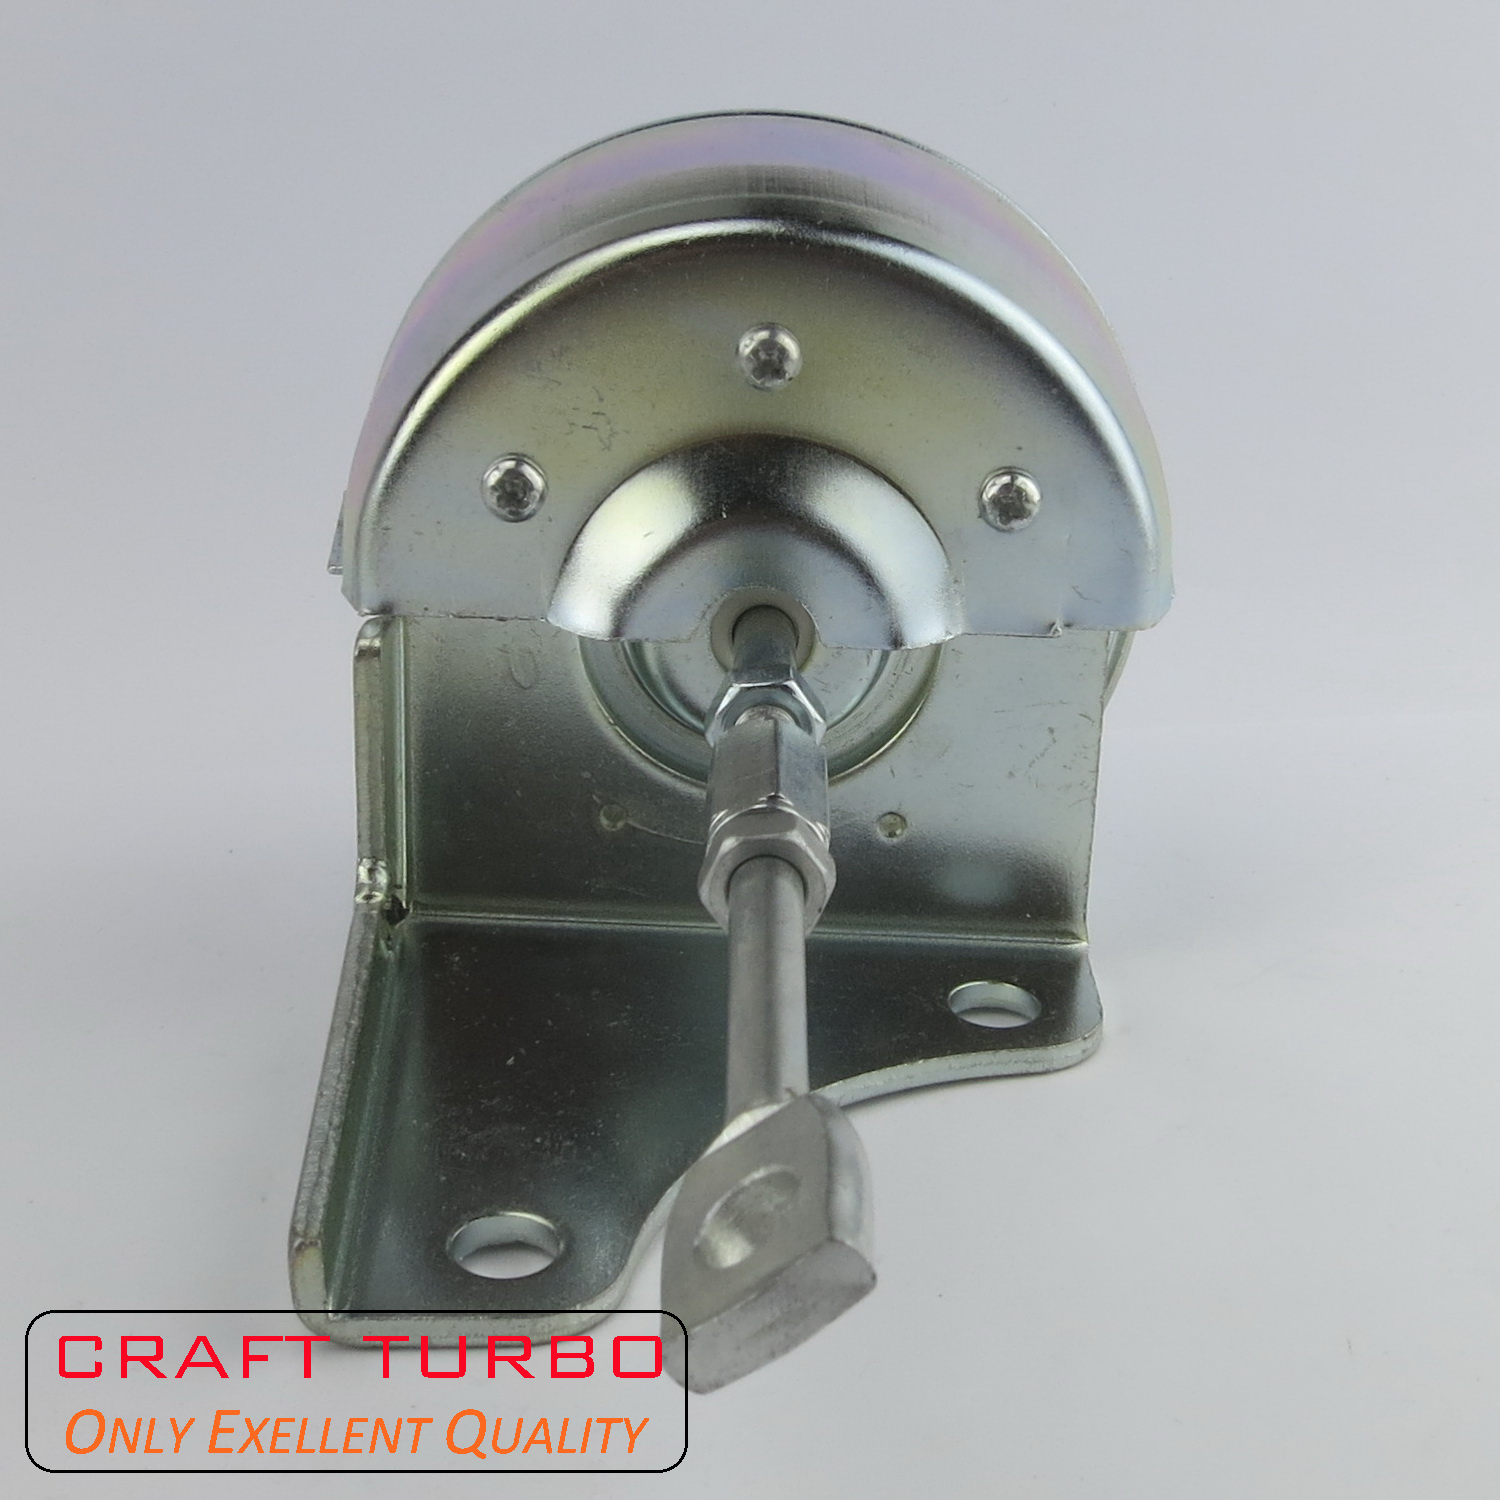 TF035HL Actuator for Turbochargers 